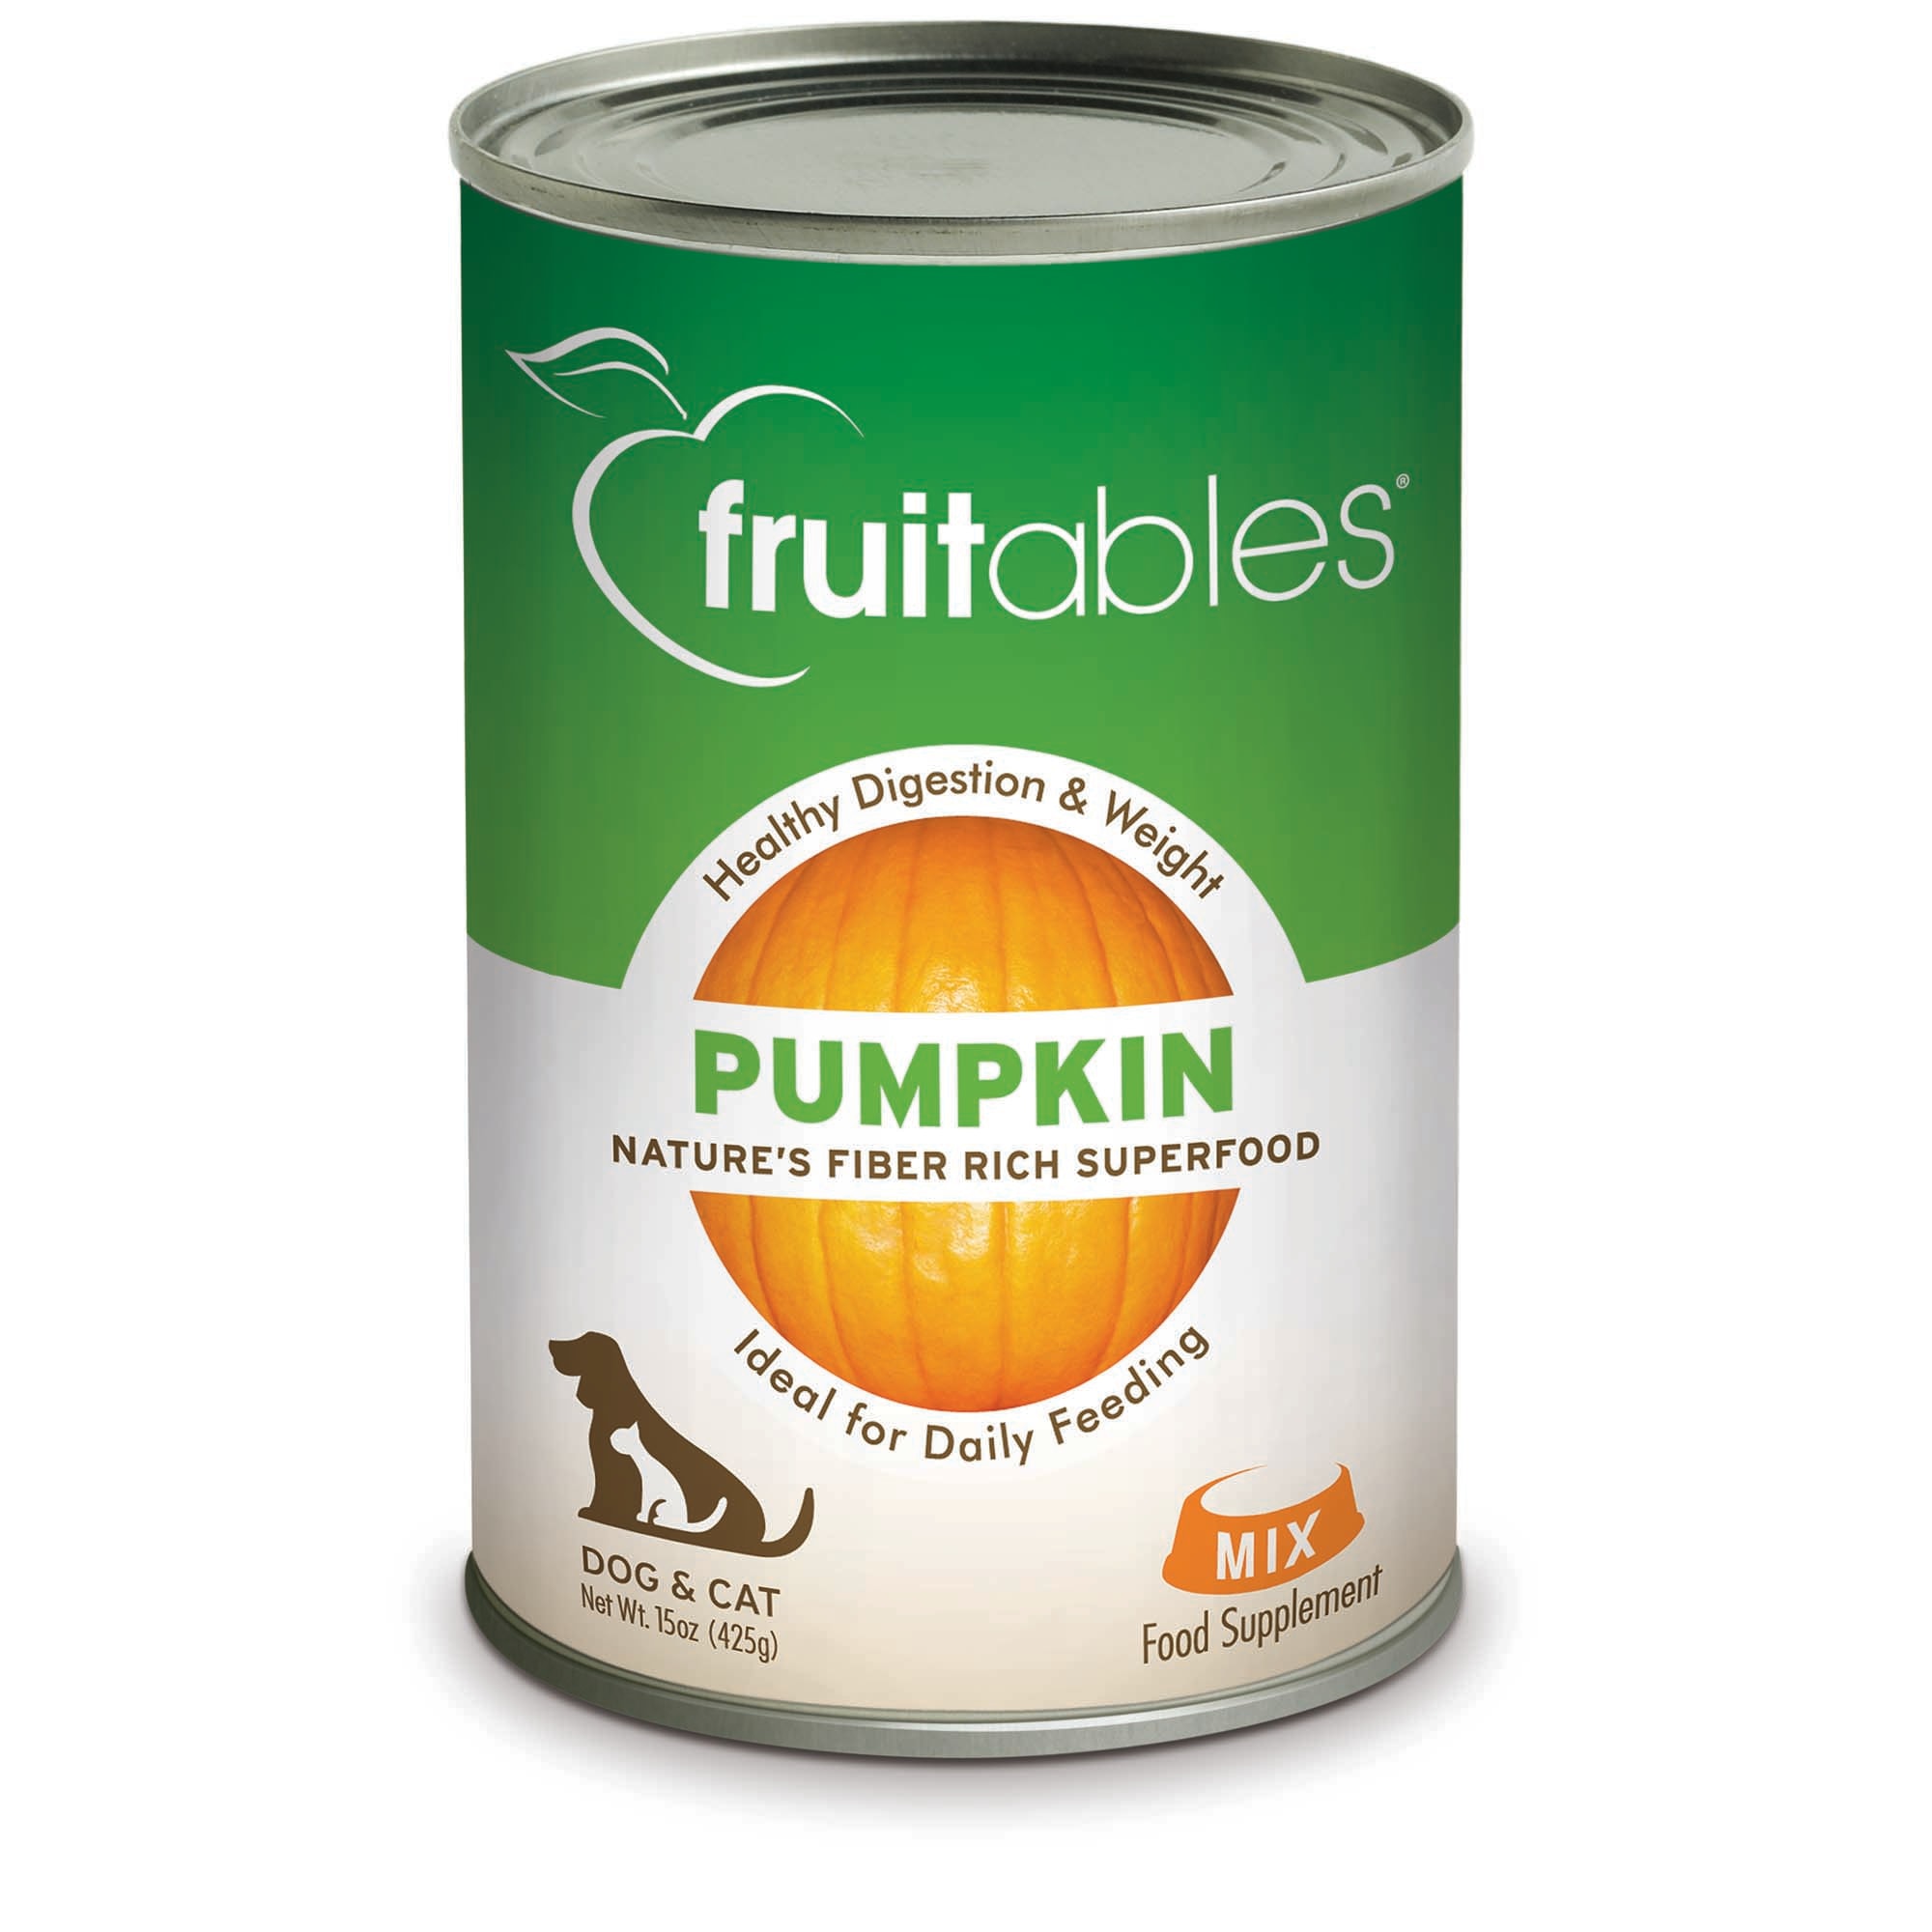 pumpkin puree for dogs